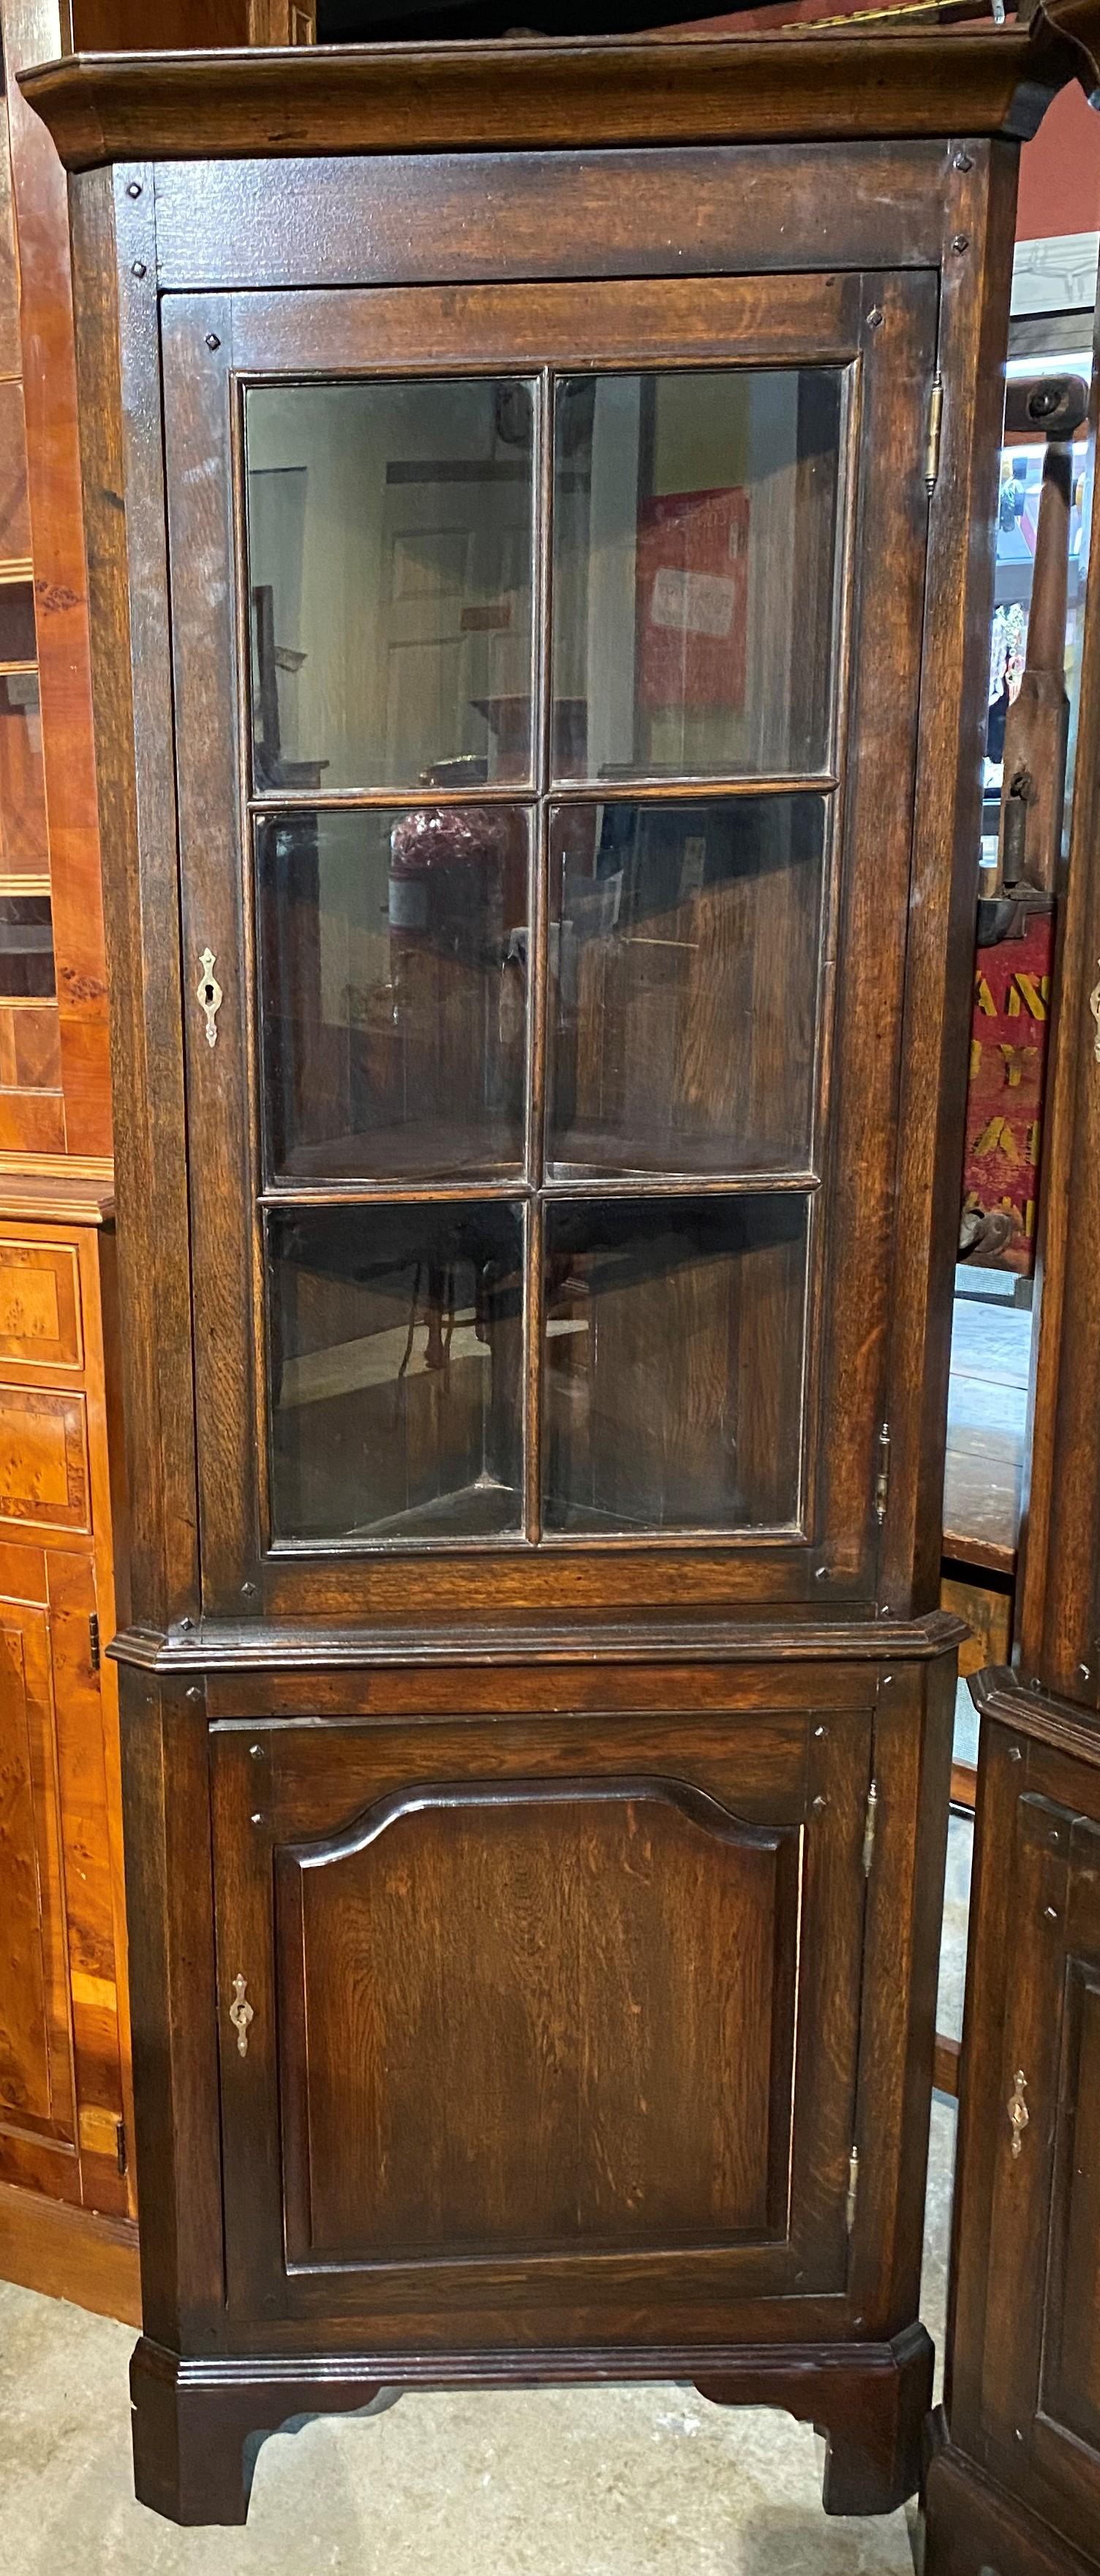 A diminutive pair of oak two door corner cupboards in their original dark finish, with molded cornice on each surmounting an upper door with six glass panels and brass escutcheon, opening to two interior shaped shelves, and a lower paneled door